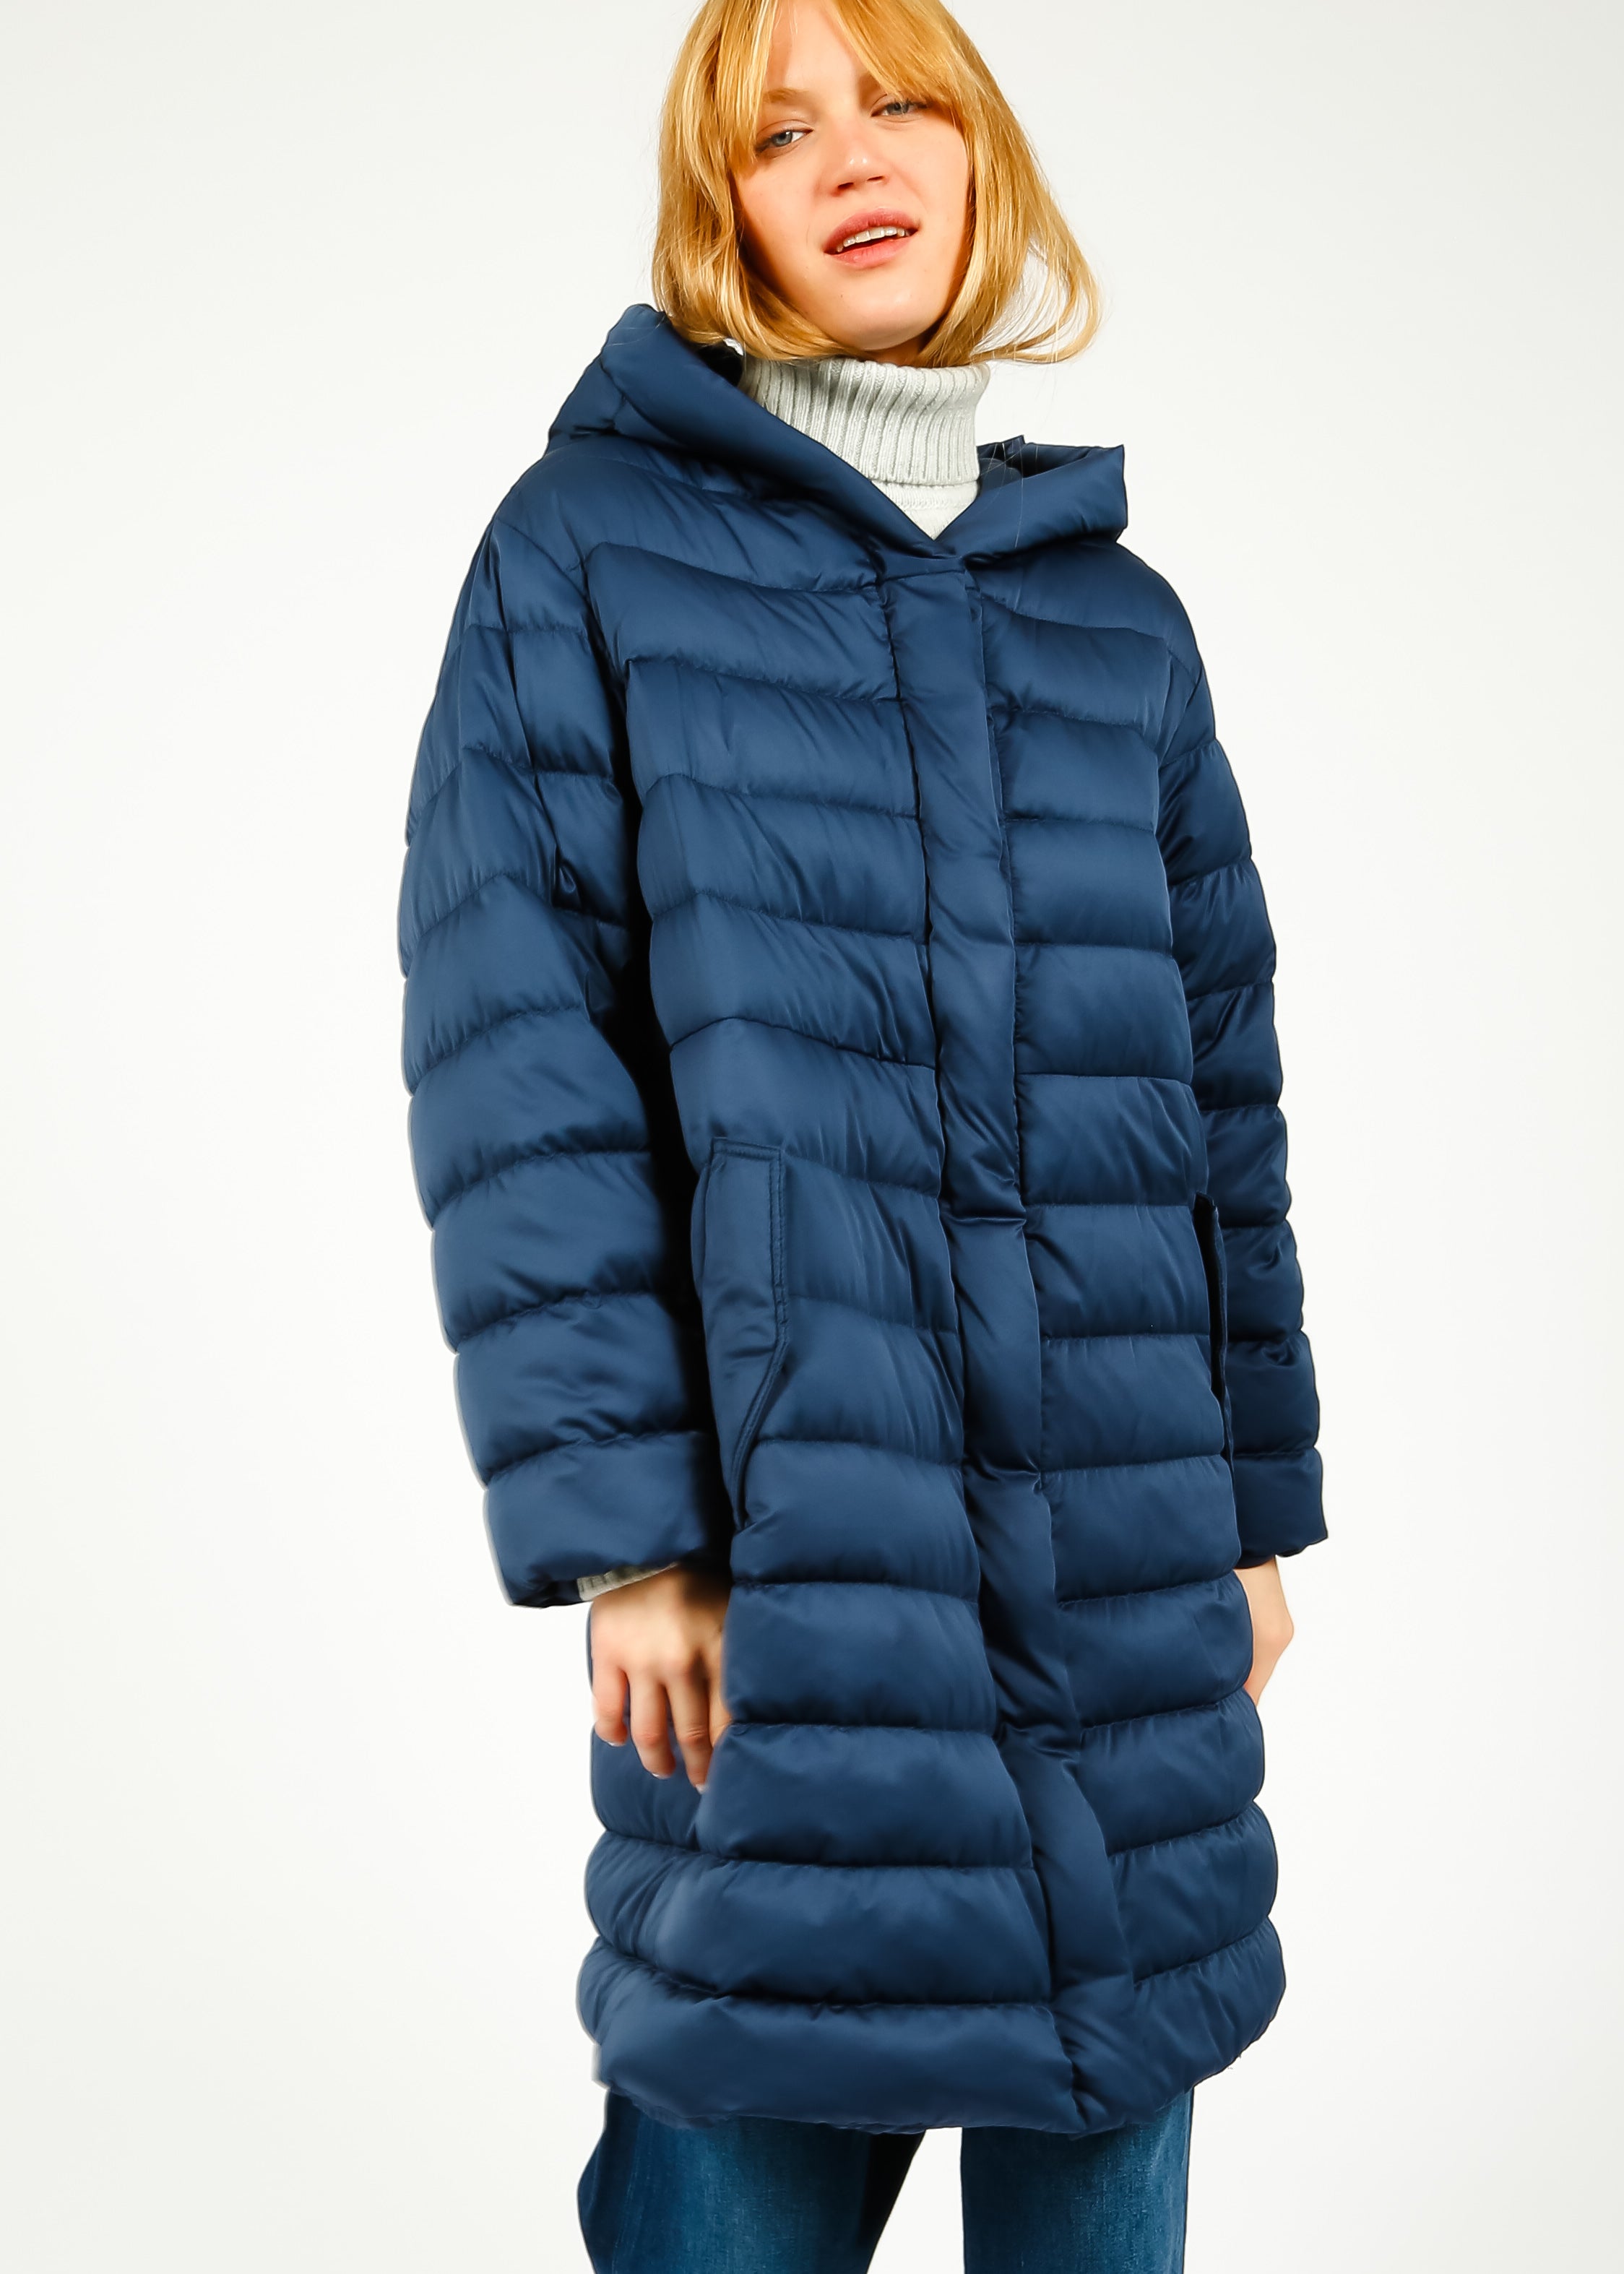 MM Laude Padded Coat in China Blue